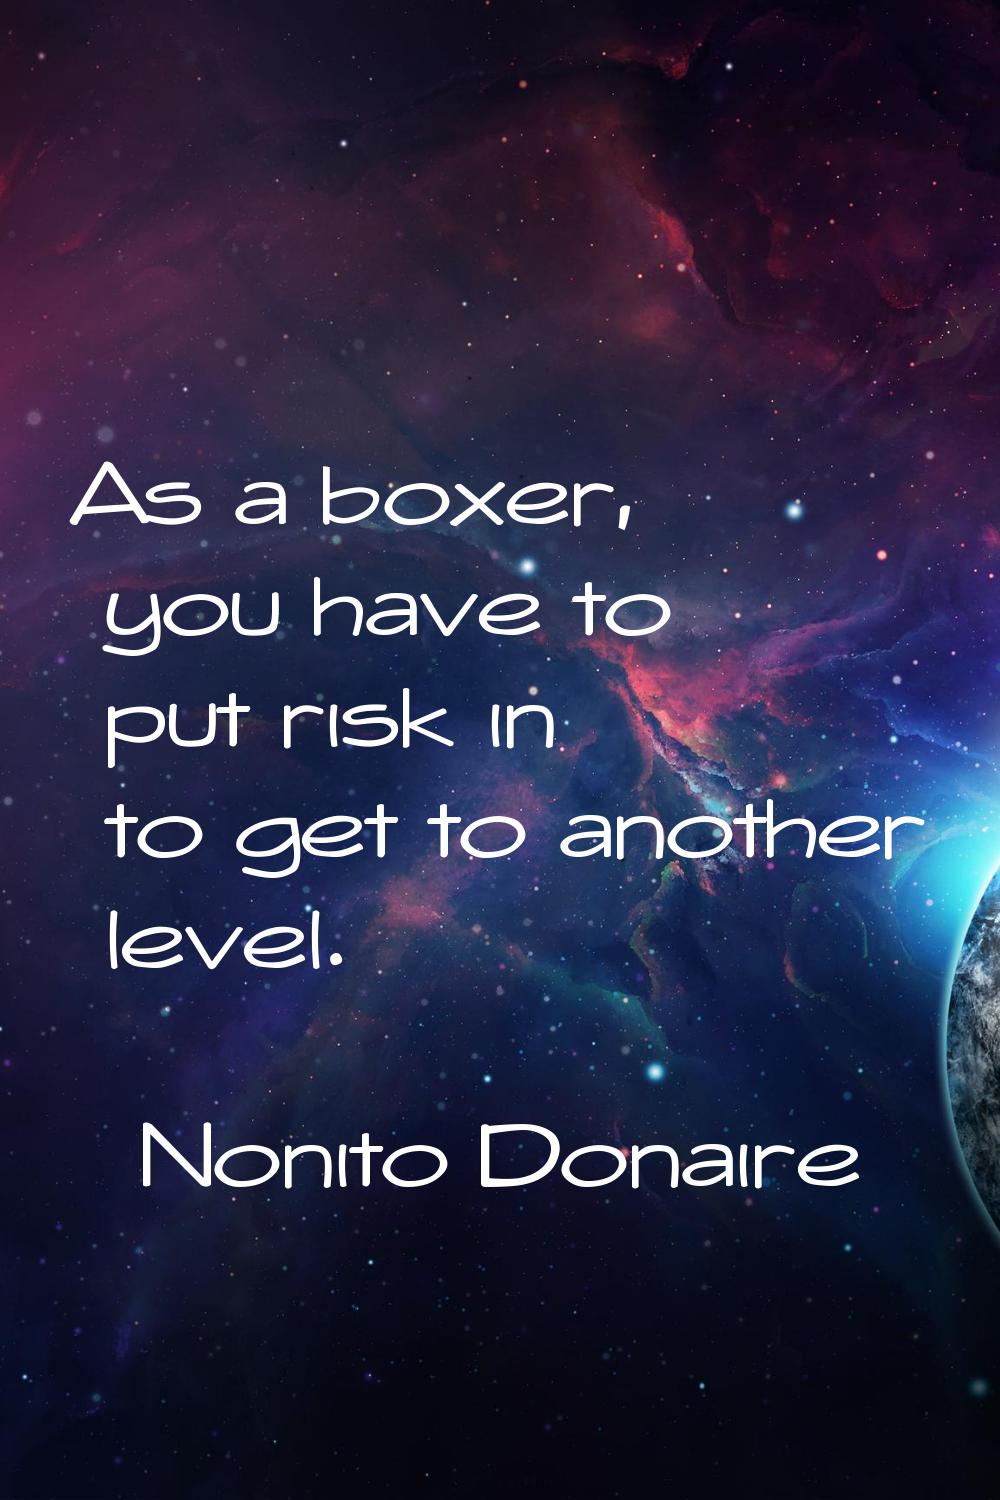 As a boxer, you have to put risk in to get to another level.